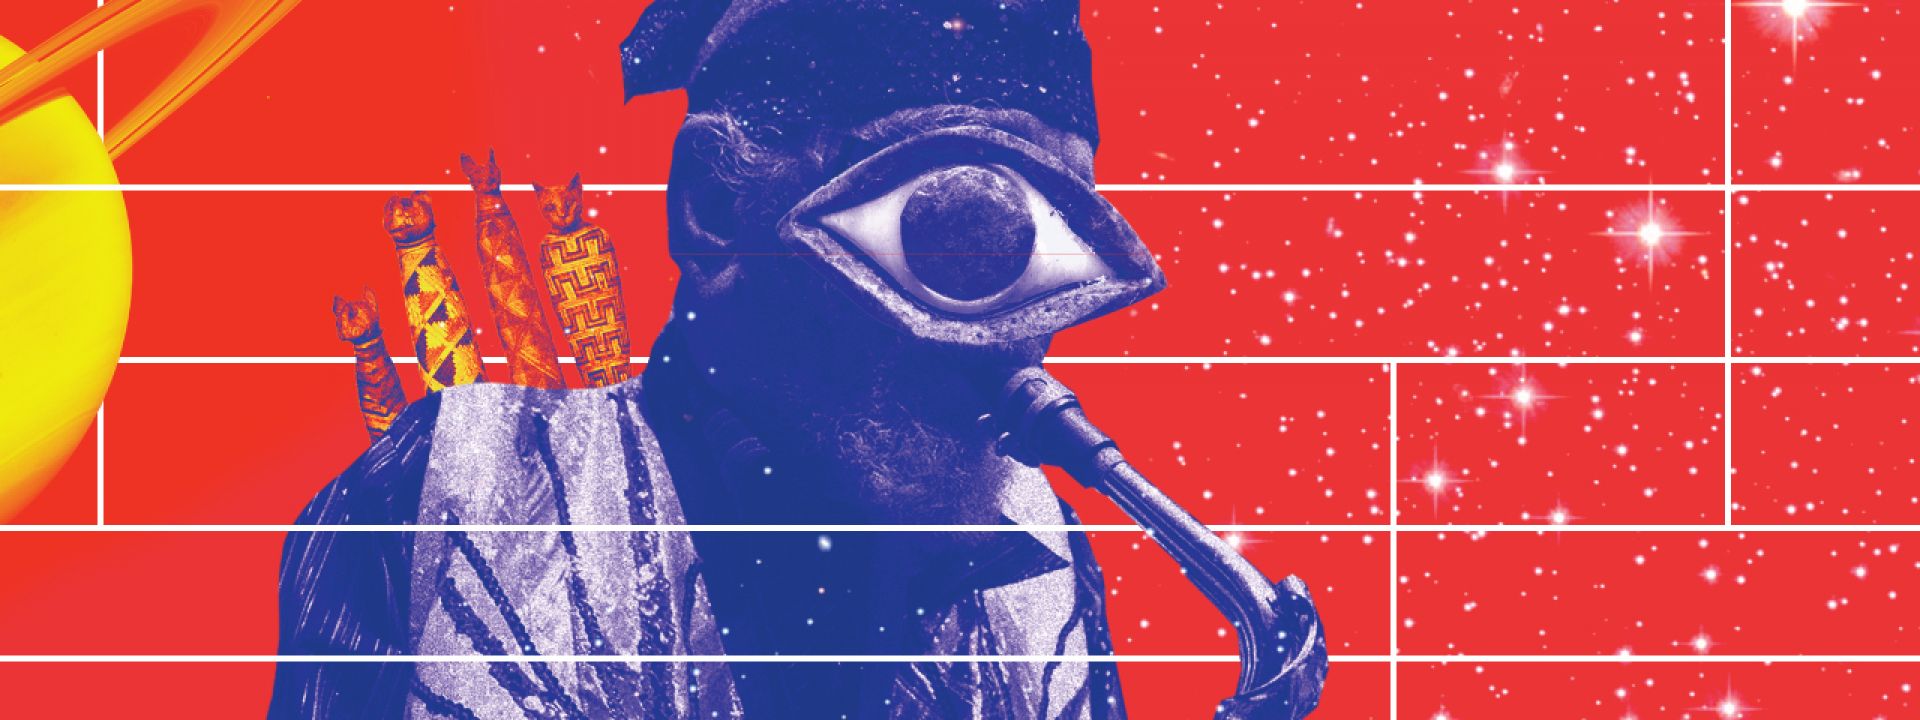 Visual for the concert of Sun Ra Arkestra